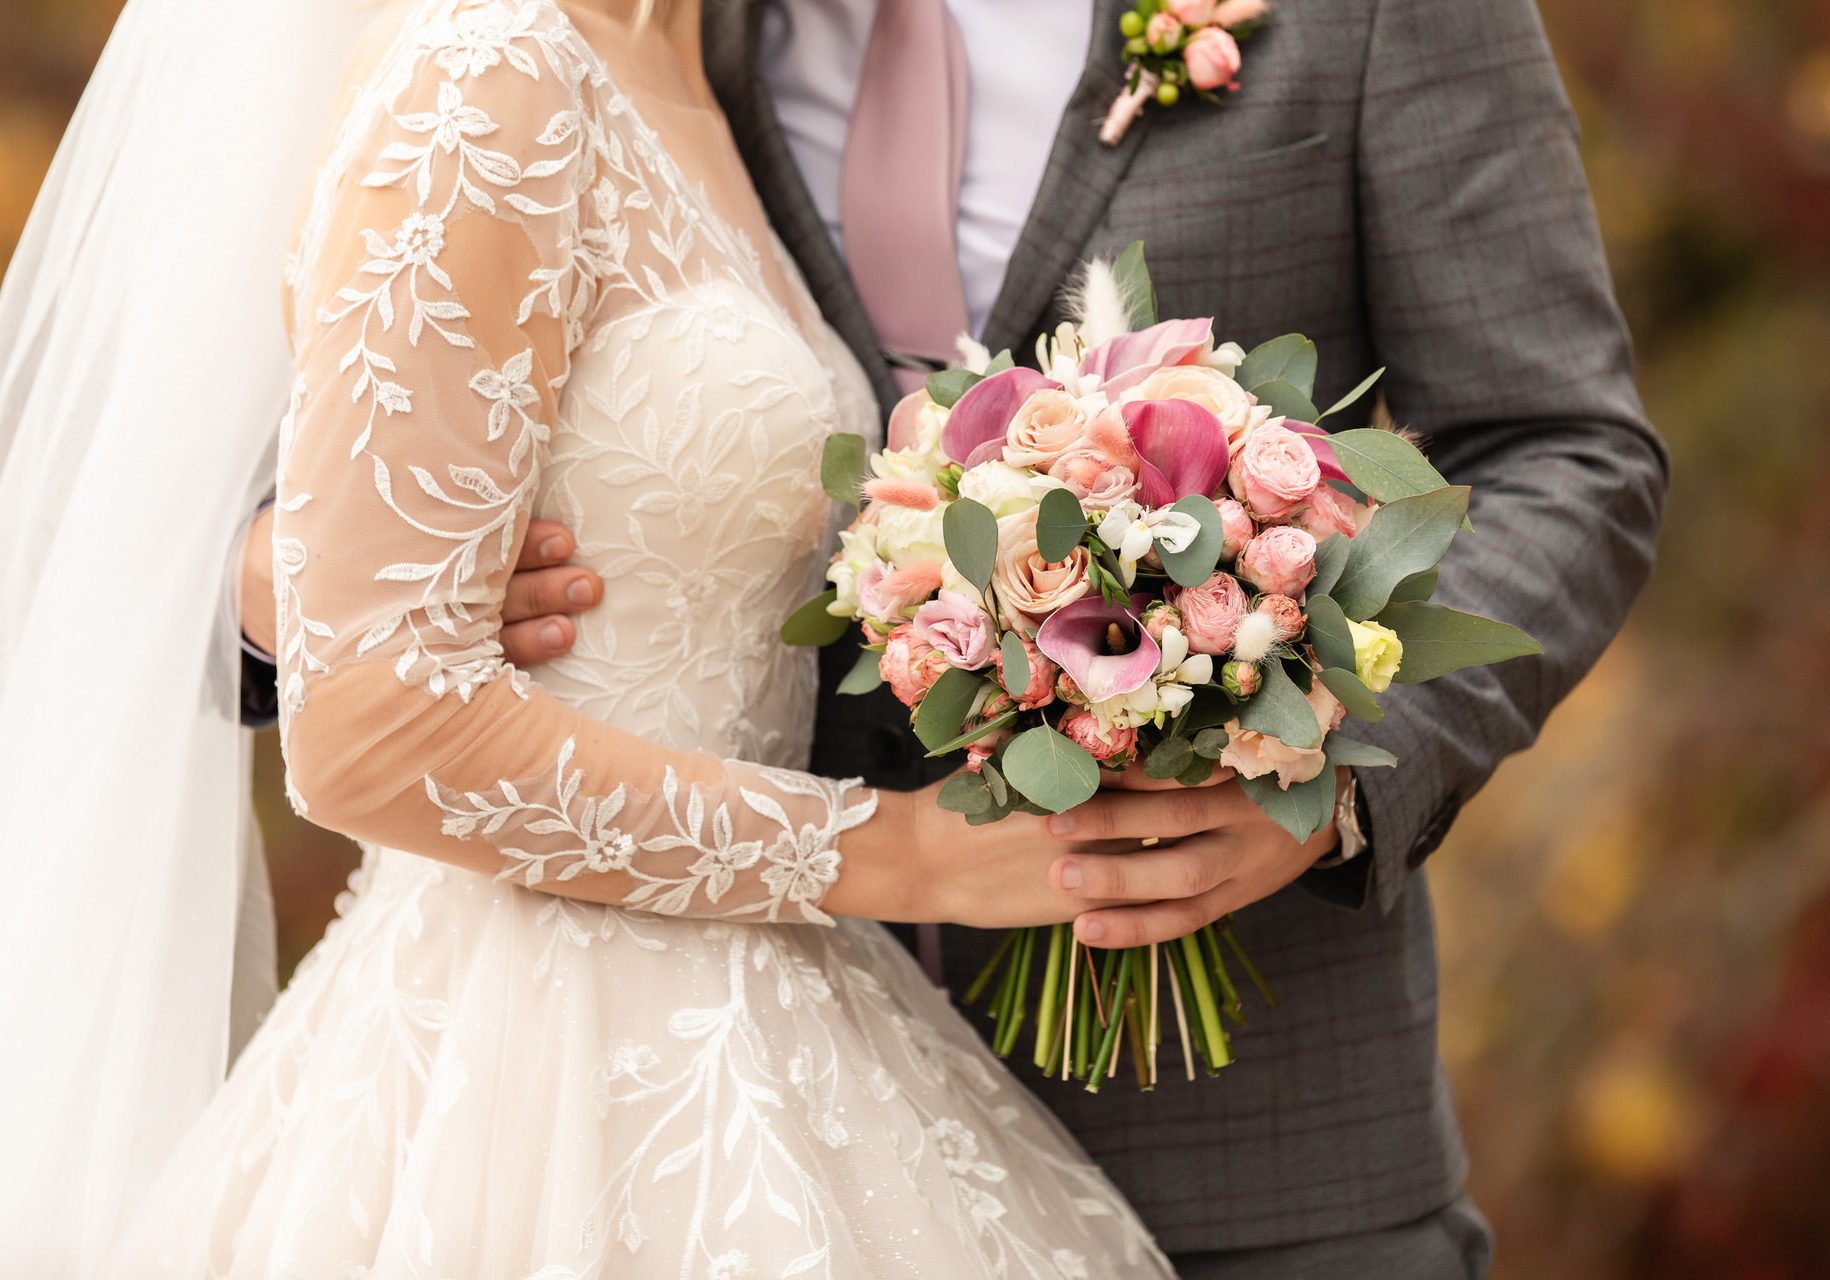 Newlyweds at wedding day, wedding couple with wedding bouquet of flowers, bride and groom